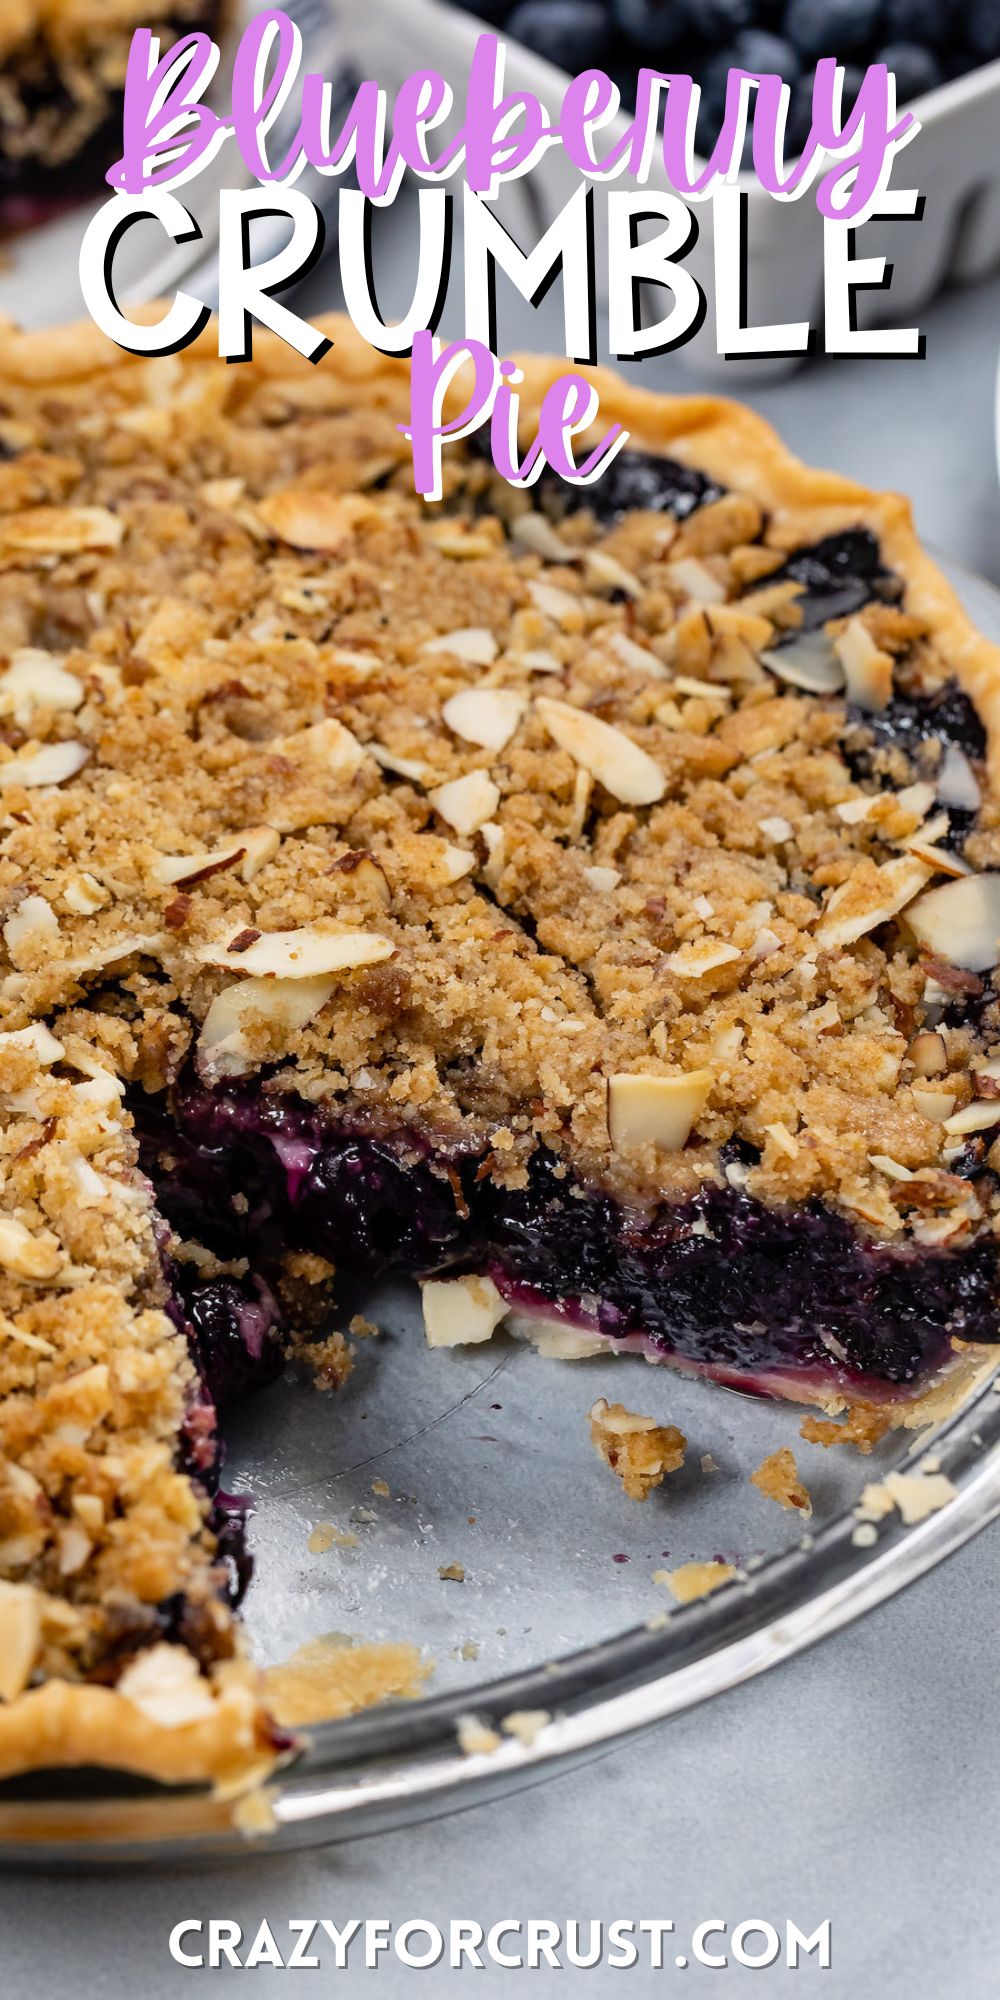 blueberry pie in a clear plate with crumble on top with words on the image.